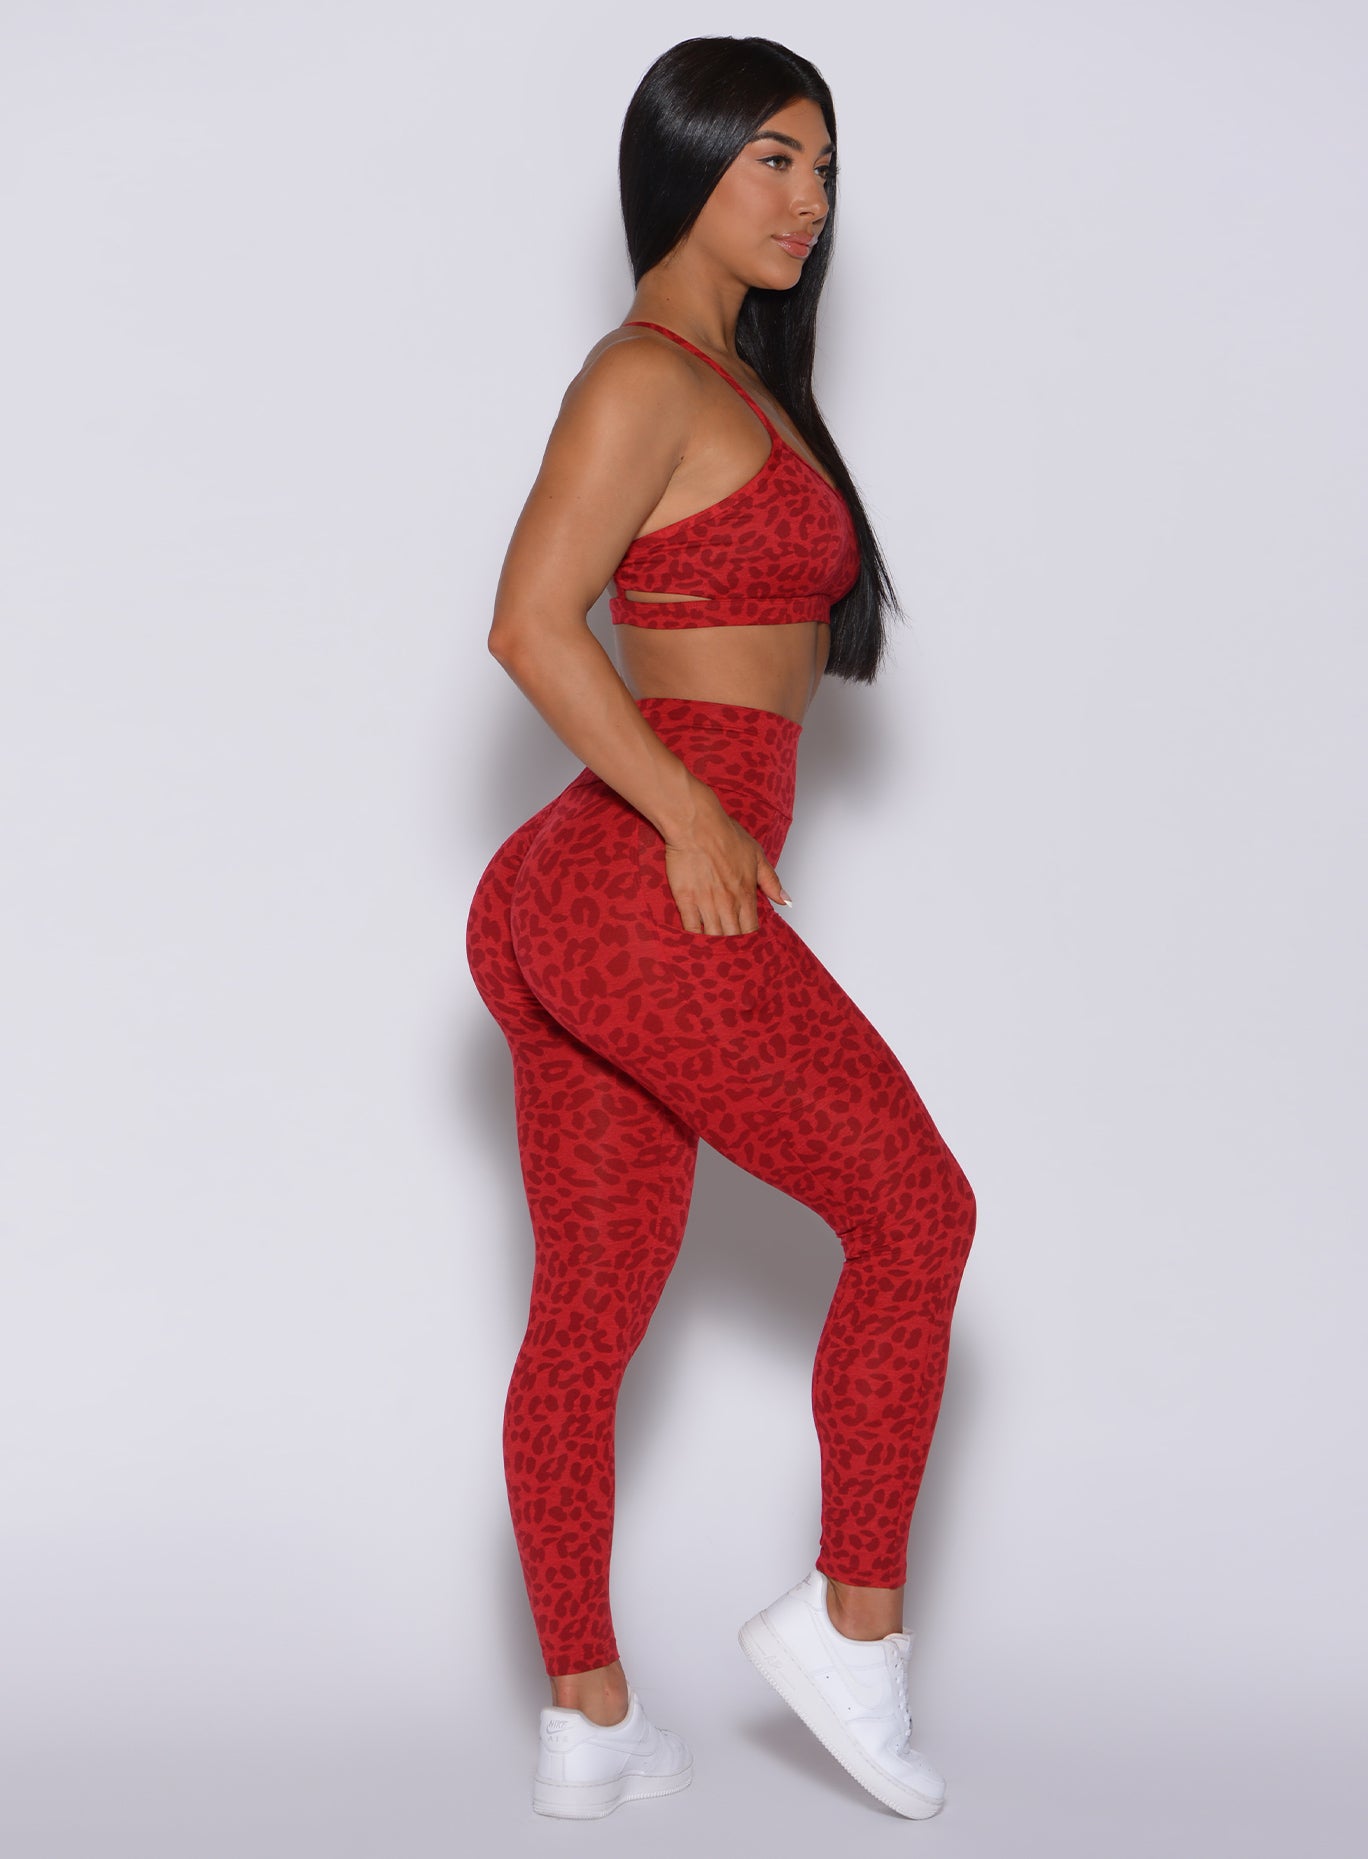 Right side profile view of a model in our curves leggings in red cheetah color and a matching sports bra